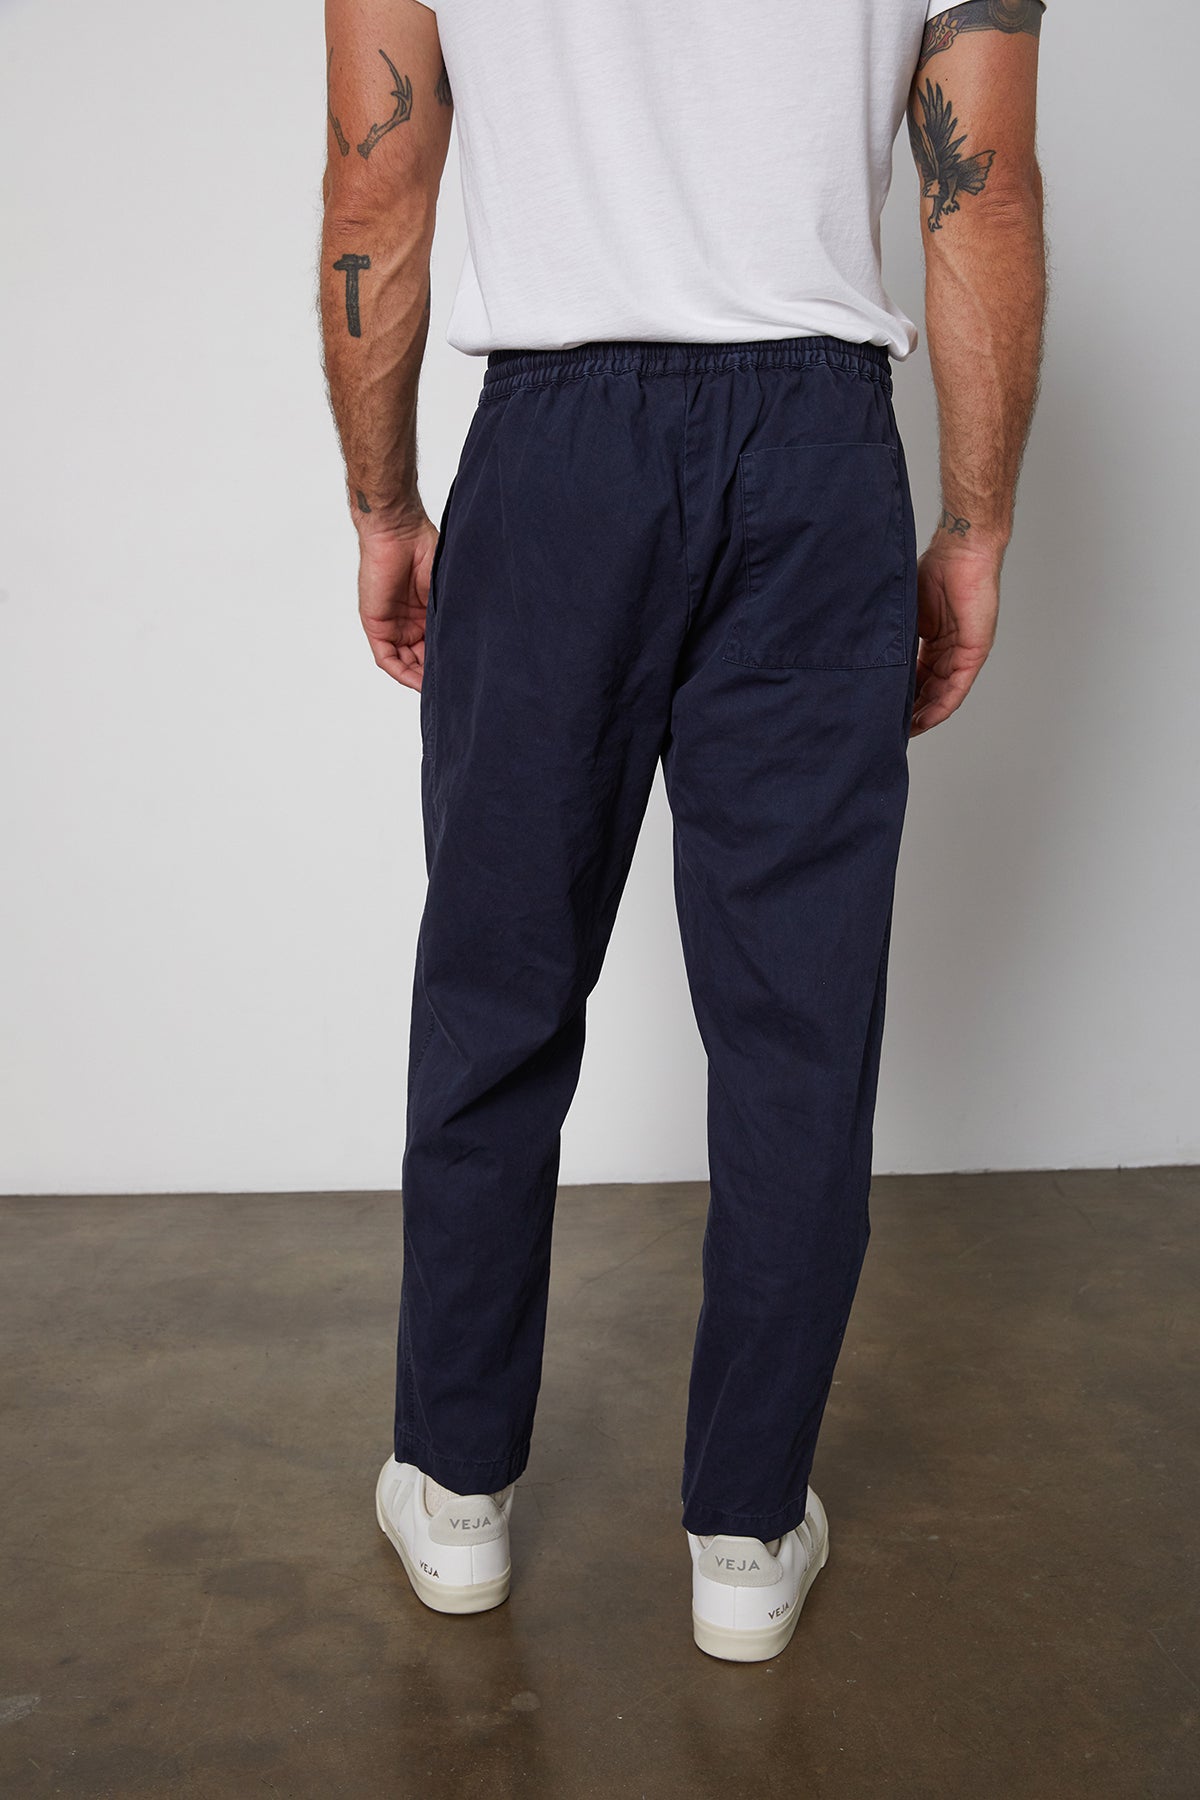 will in navy back pant-24148957593793